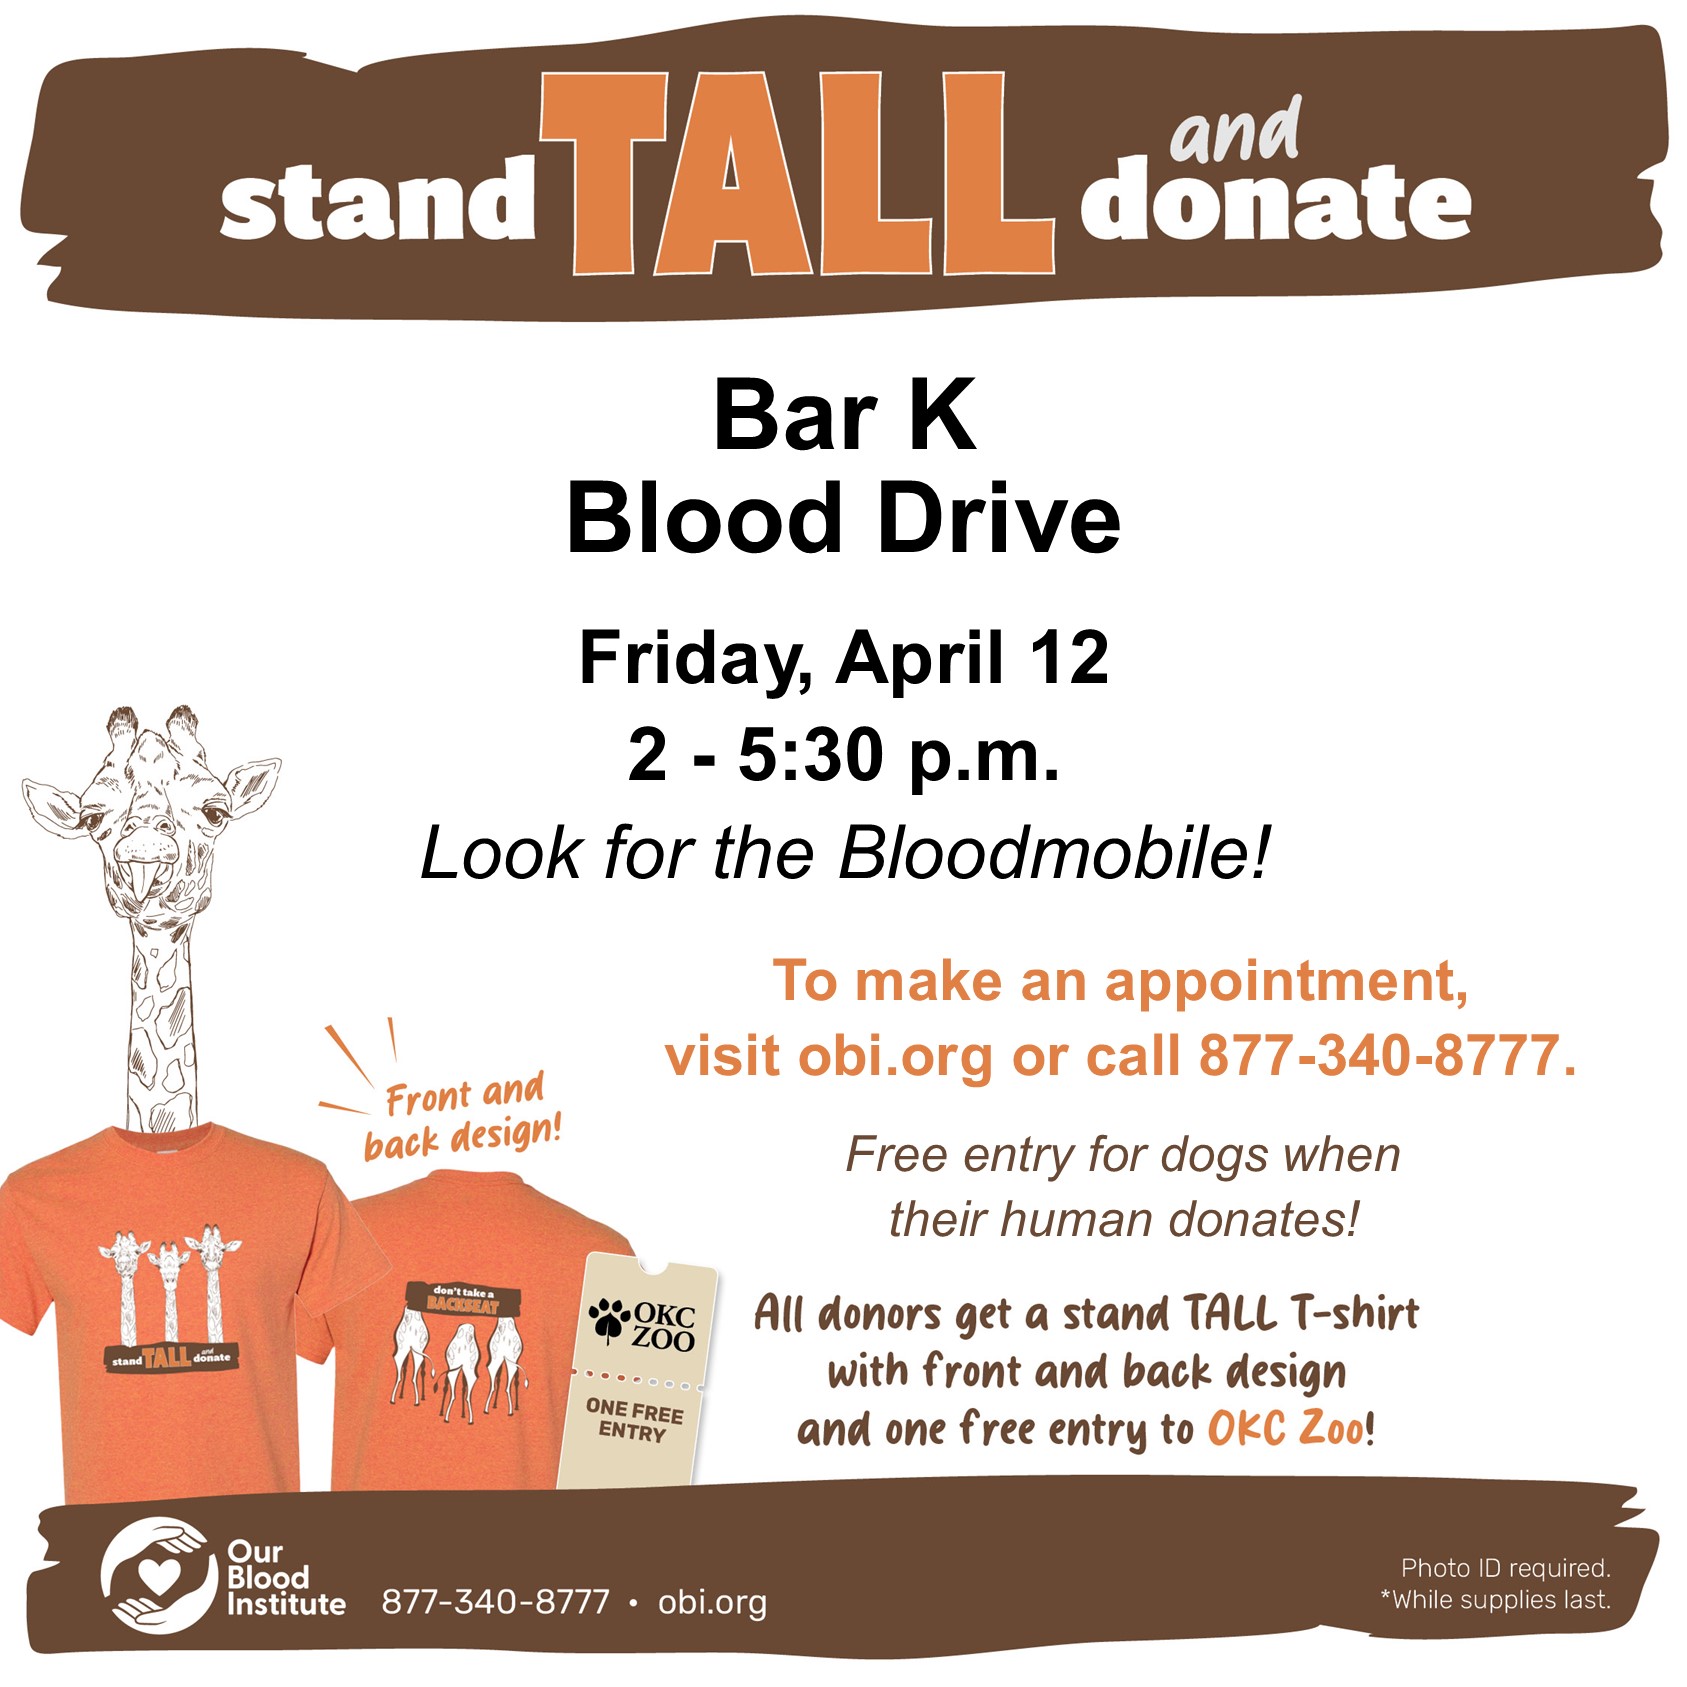 Stand Tall and donate. Bar K Blood Drive on Friday, April 12th from 2 to 5:30 pm. Look for the bloodmobile! To make an appointment, visit obi.org or call 877-340-8777. Free entry for dogs when their human donates! All donors get a stand tall t-shirt with front and back design and one free entry to OKC Zoo!